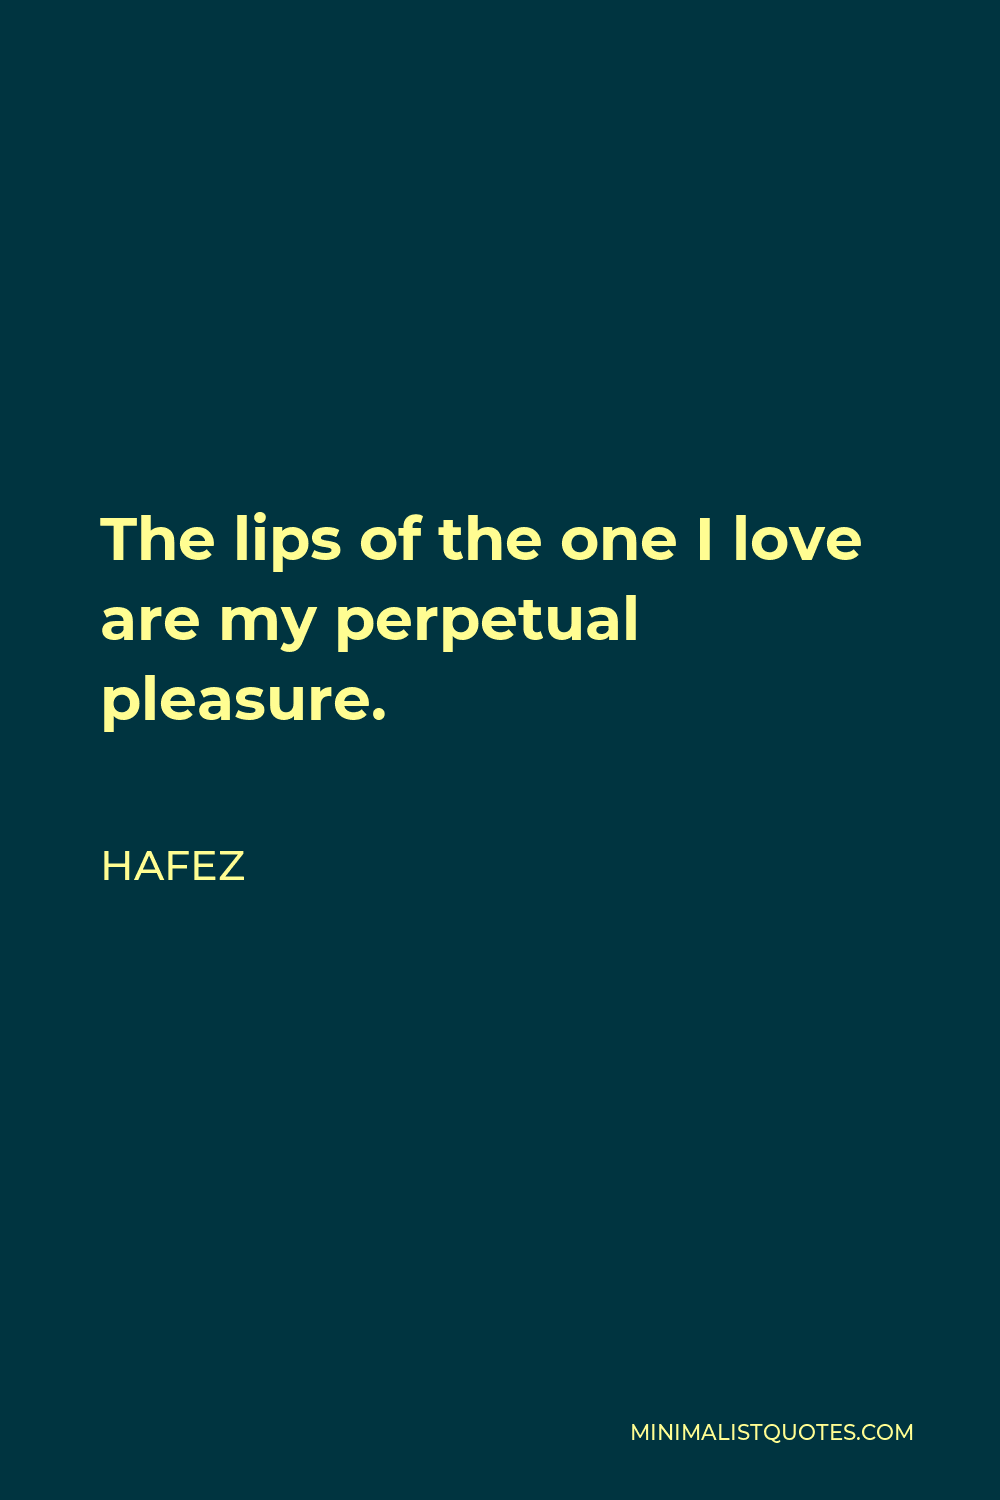 Hafez Quote - The lips of the one I love are my perpetual pleasure.